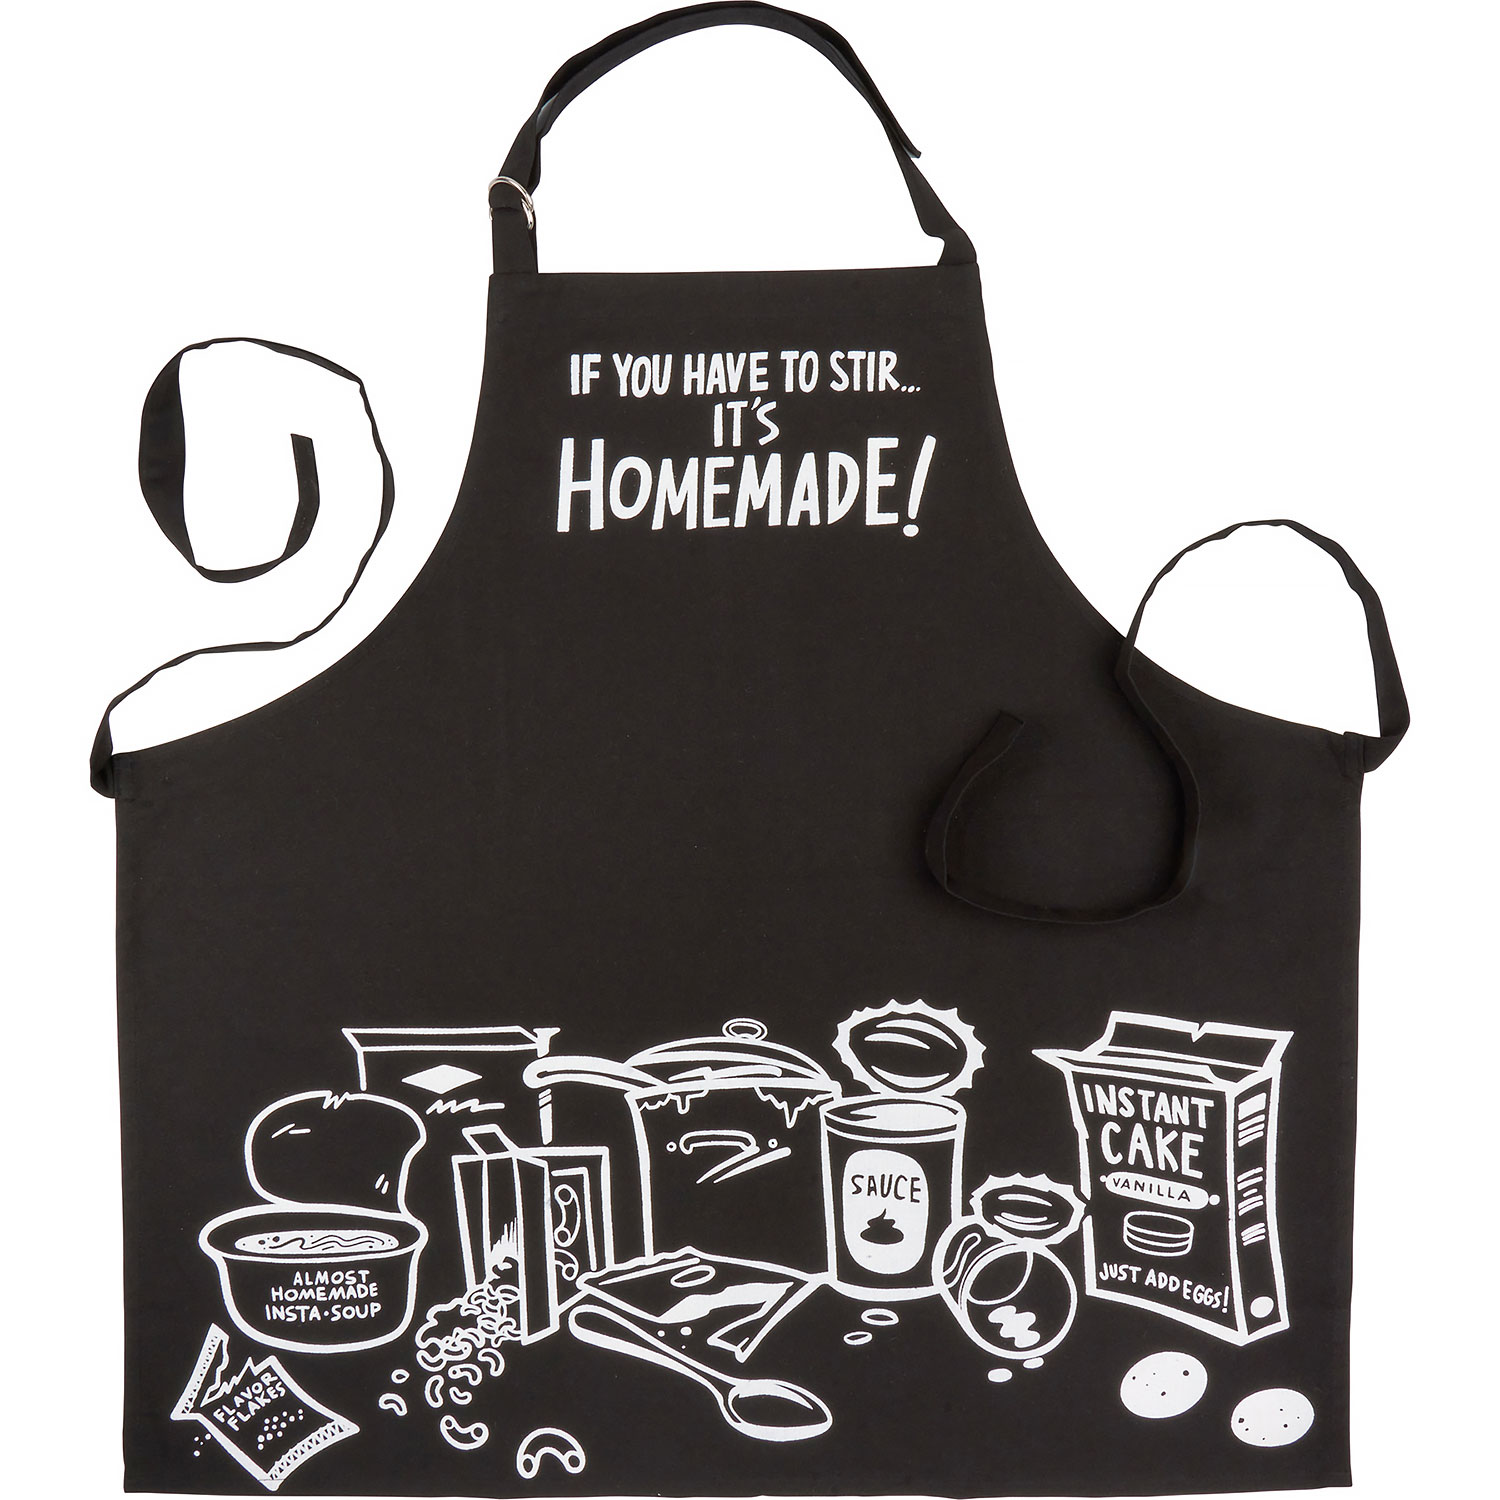 If You Have To Stir It's Homemade Apron - Adult